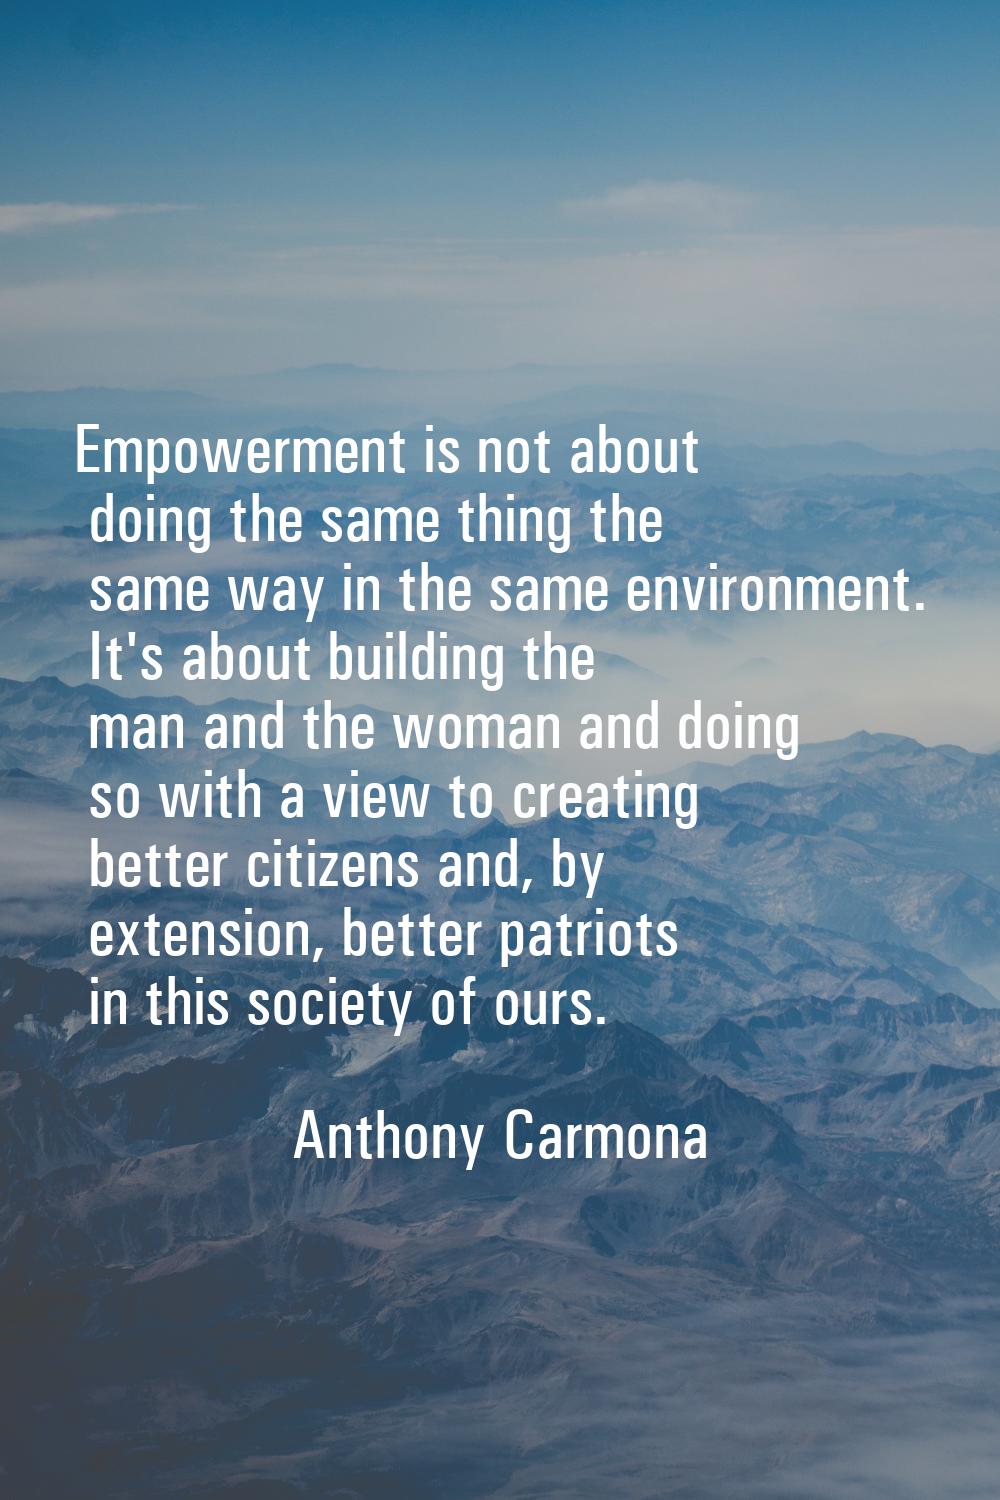 Empowerment is not about doing the same thing the same way in the same environment. It's about buil